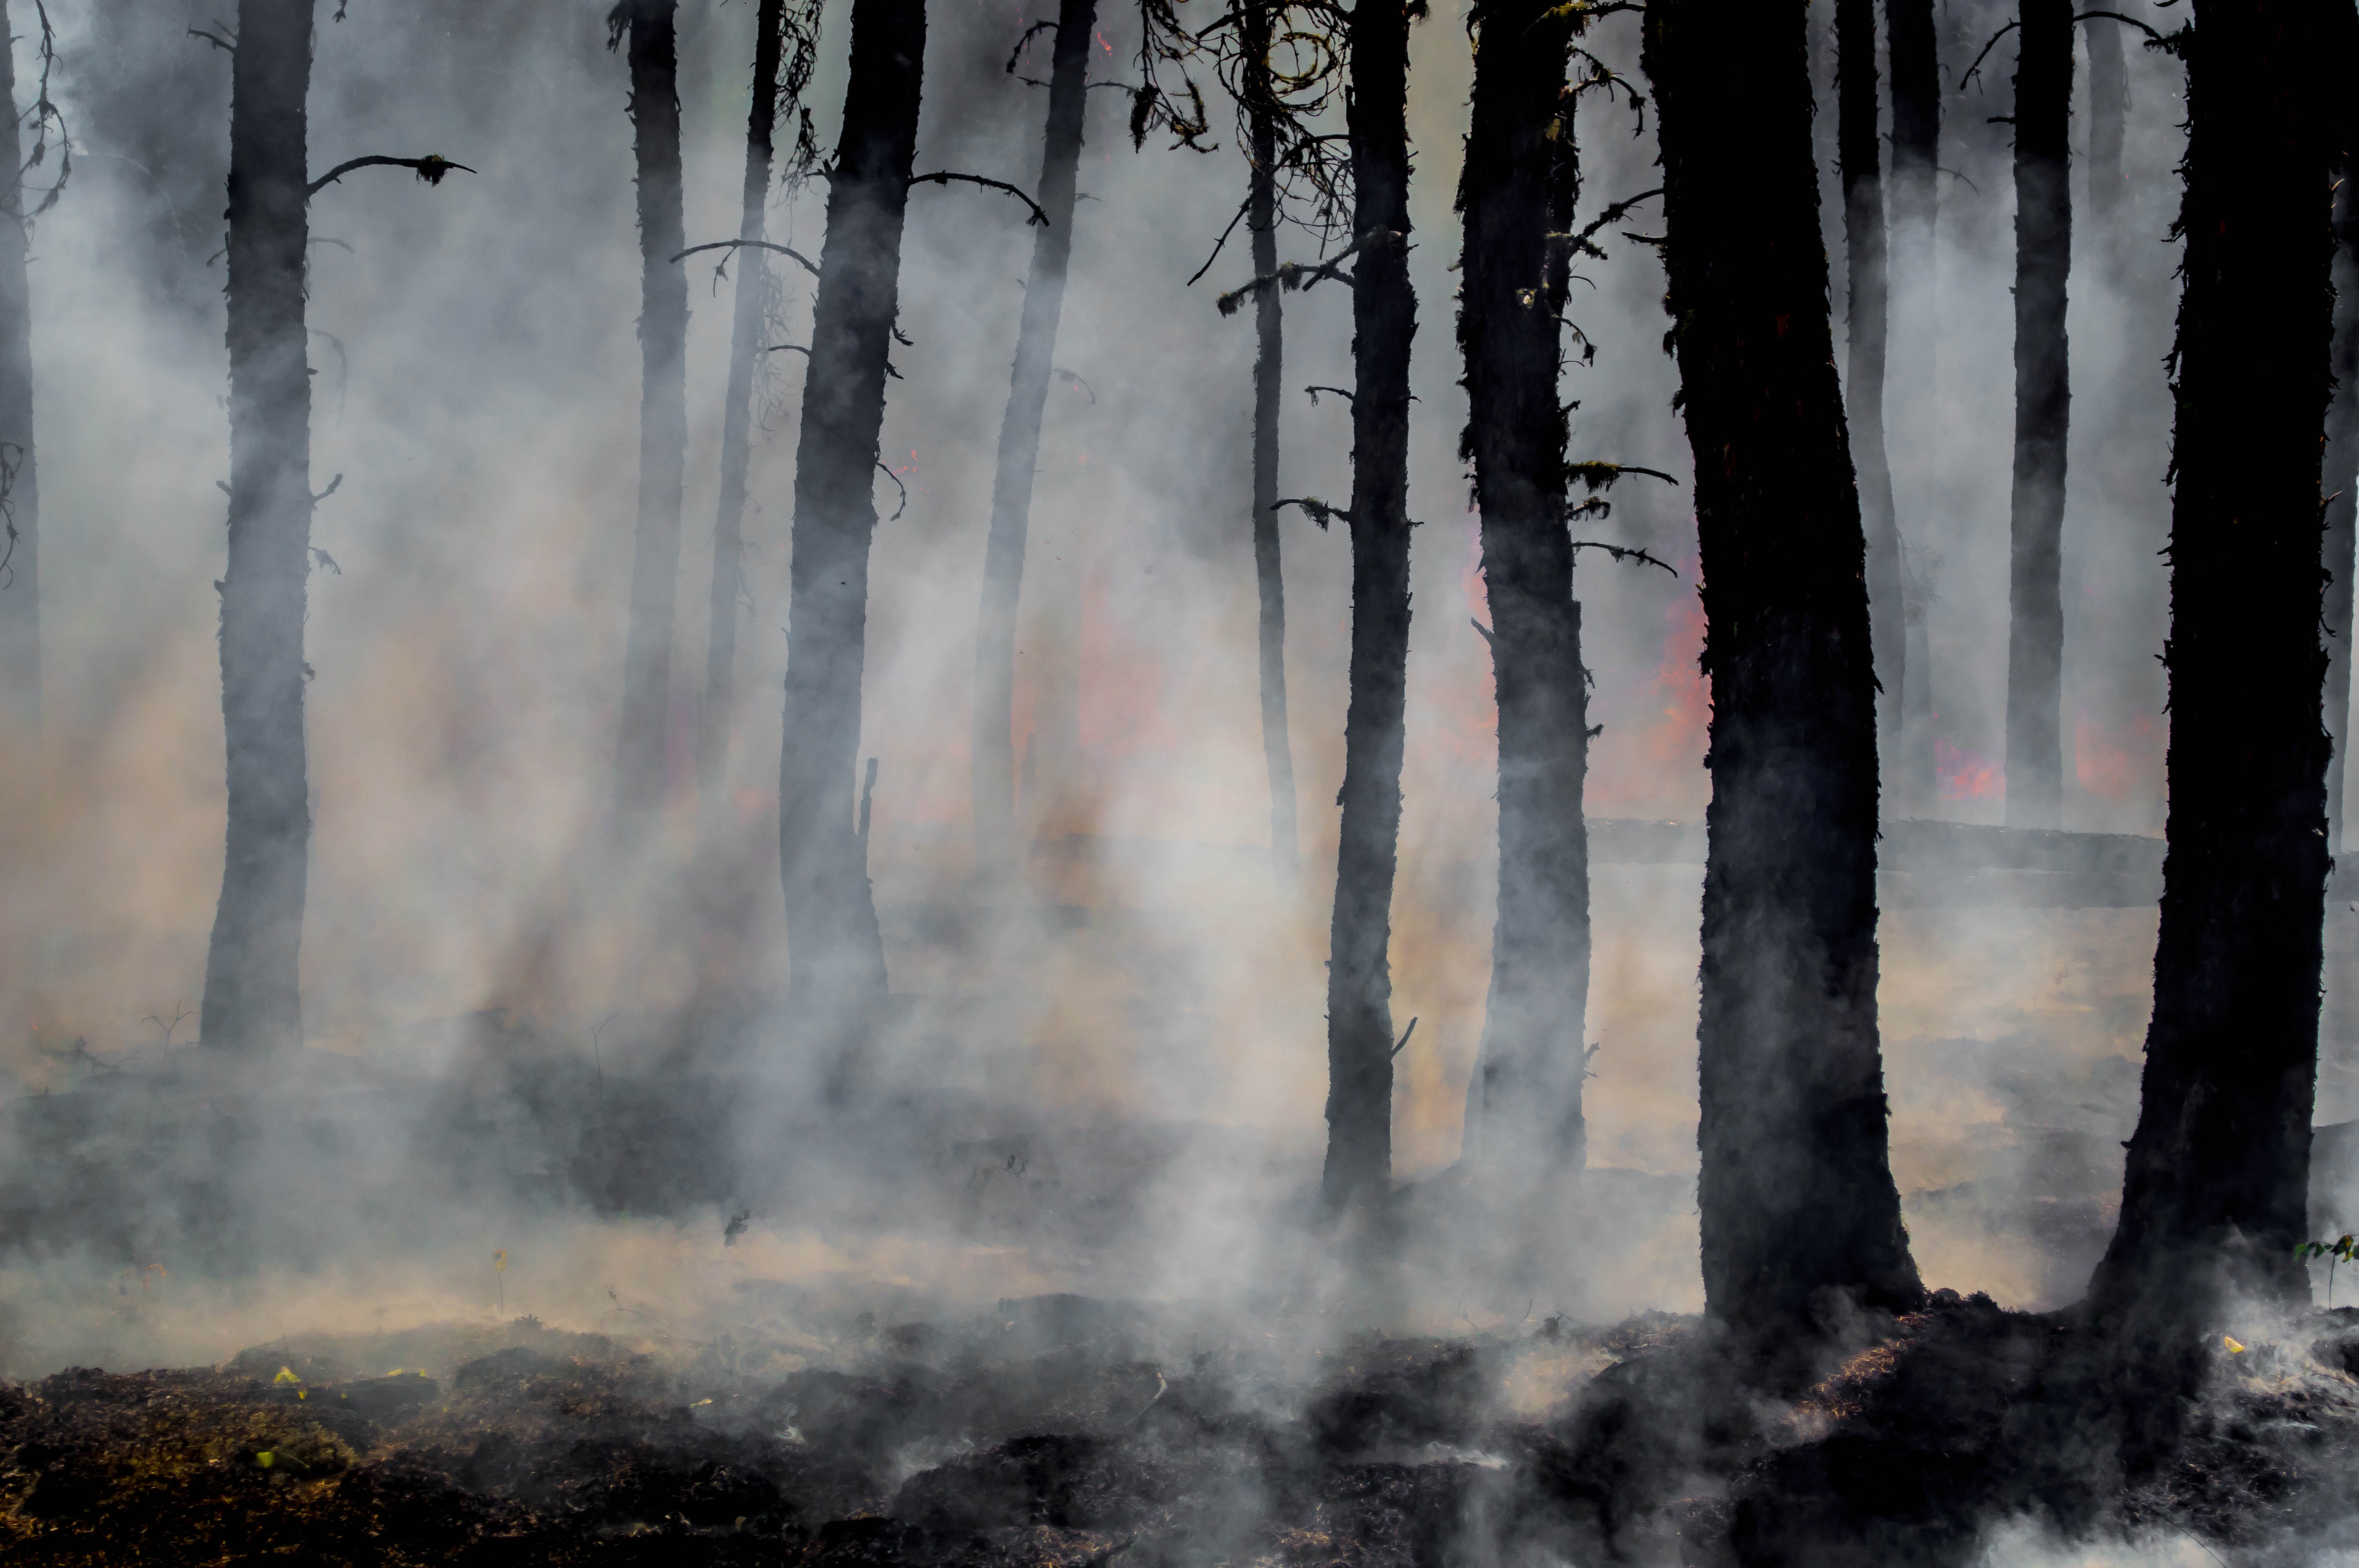 Smoke rises from the floor of a forest after a wildfire.